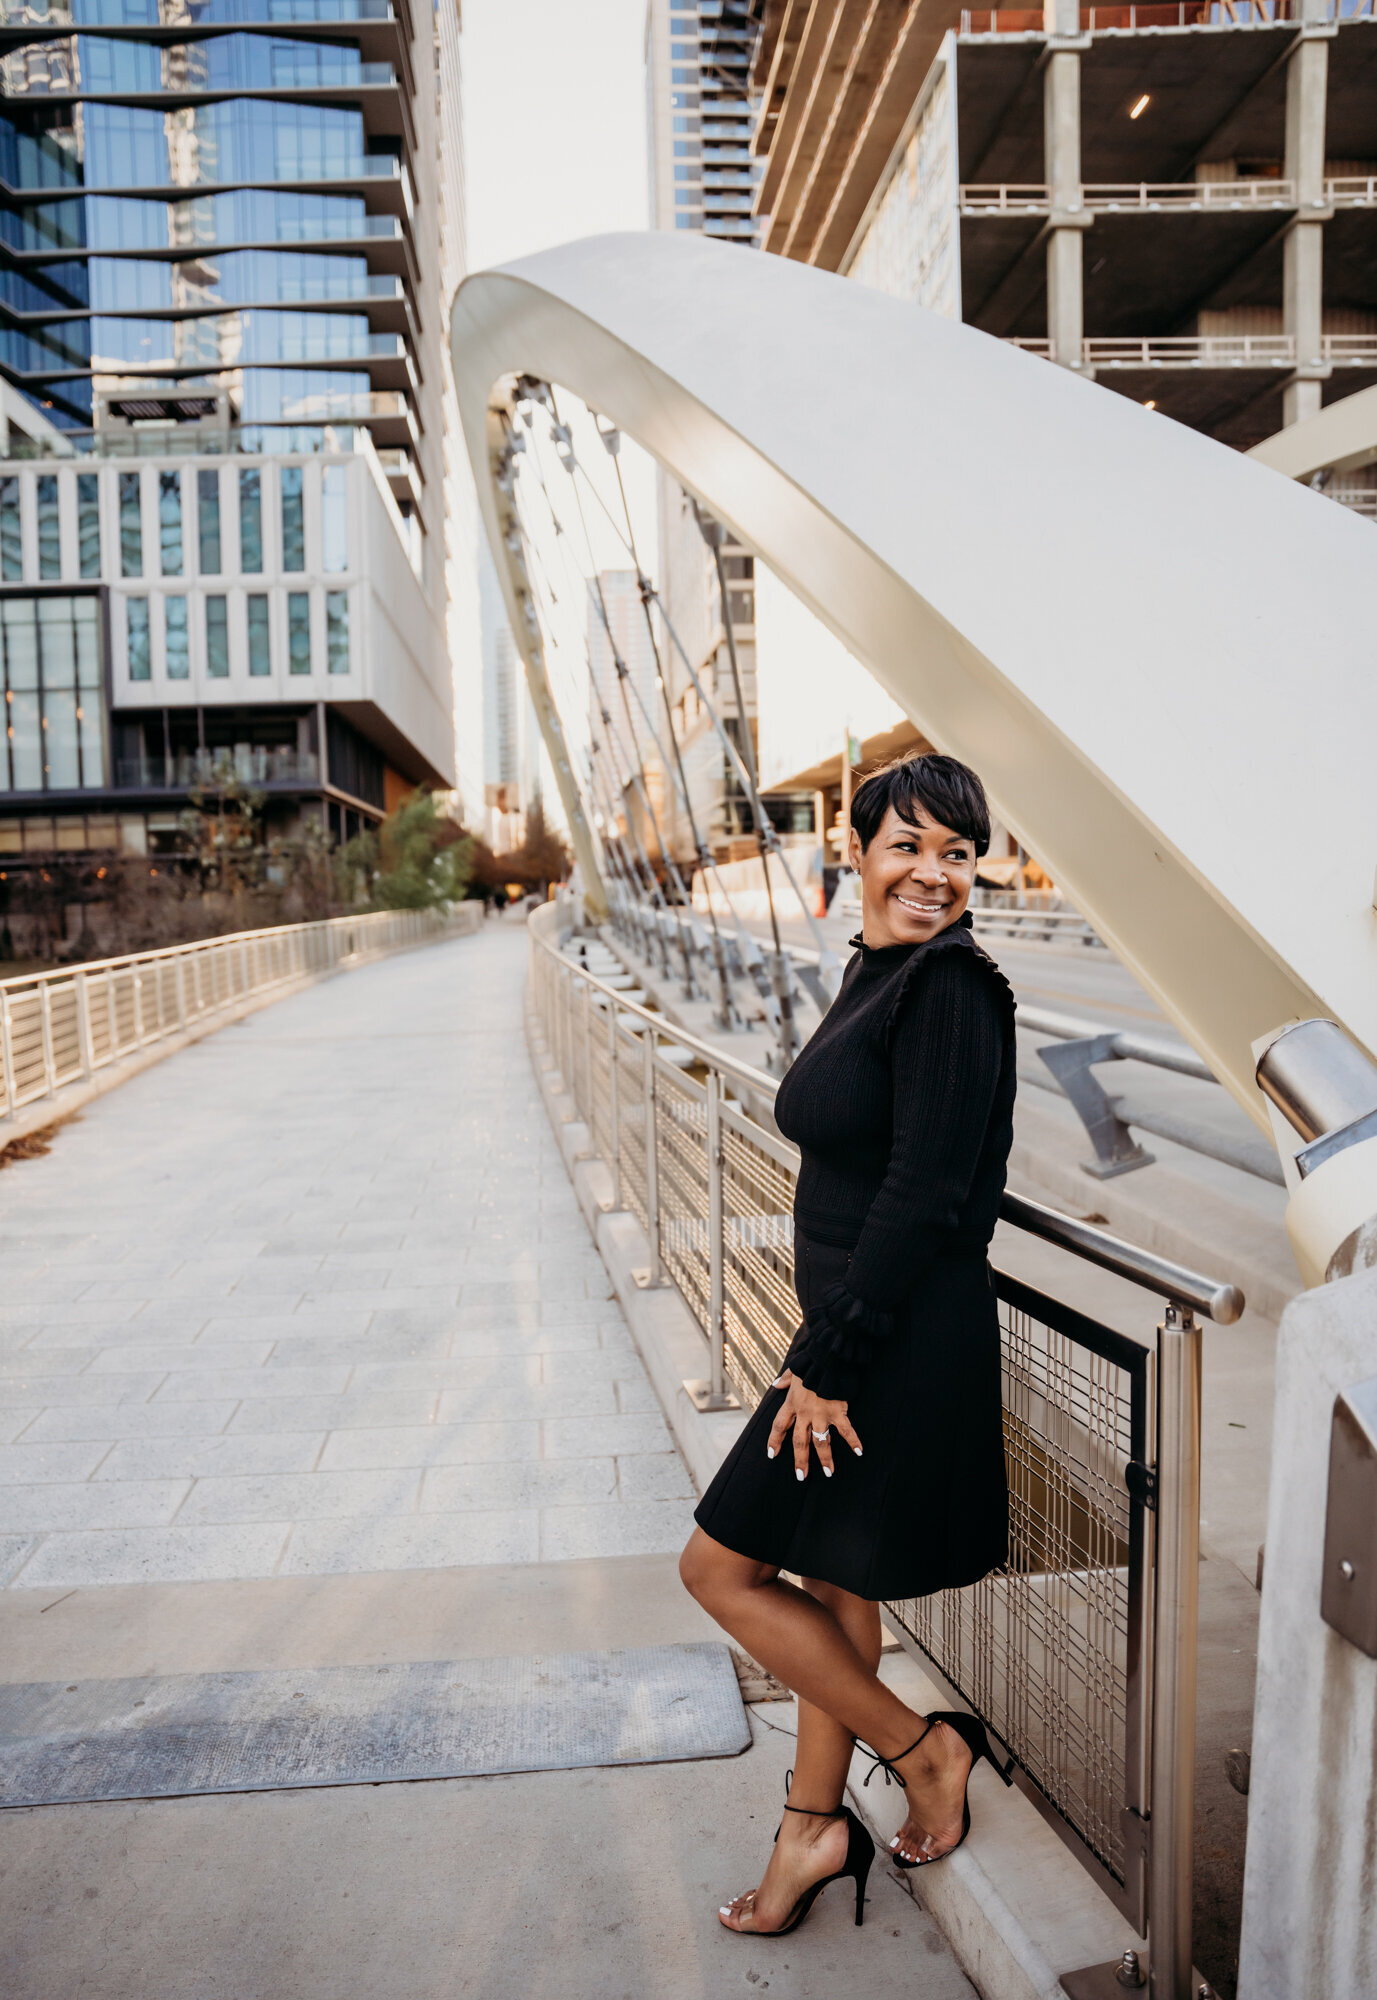 Branding Photographer, a woman in dress and heels leans on a city bridge